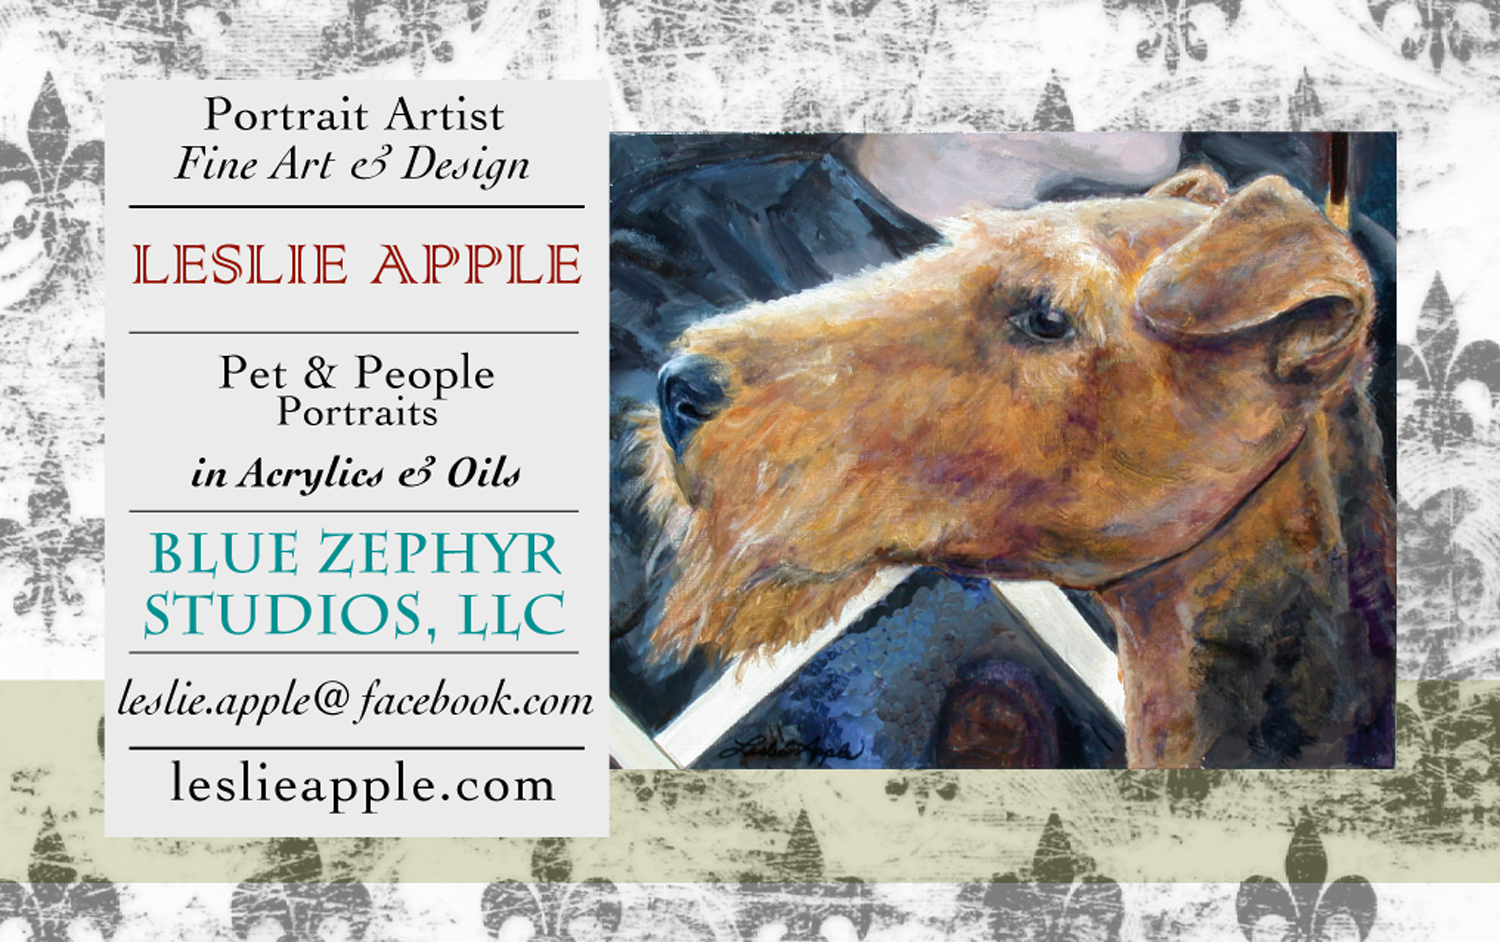 2012 my business cardFB banner.jpg